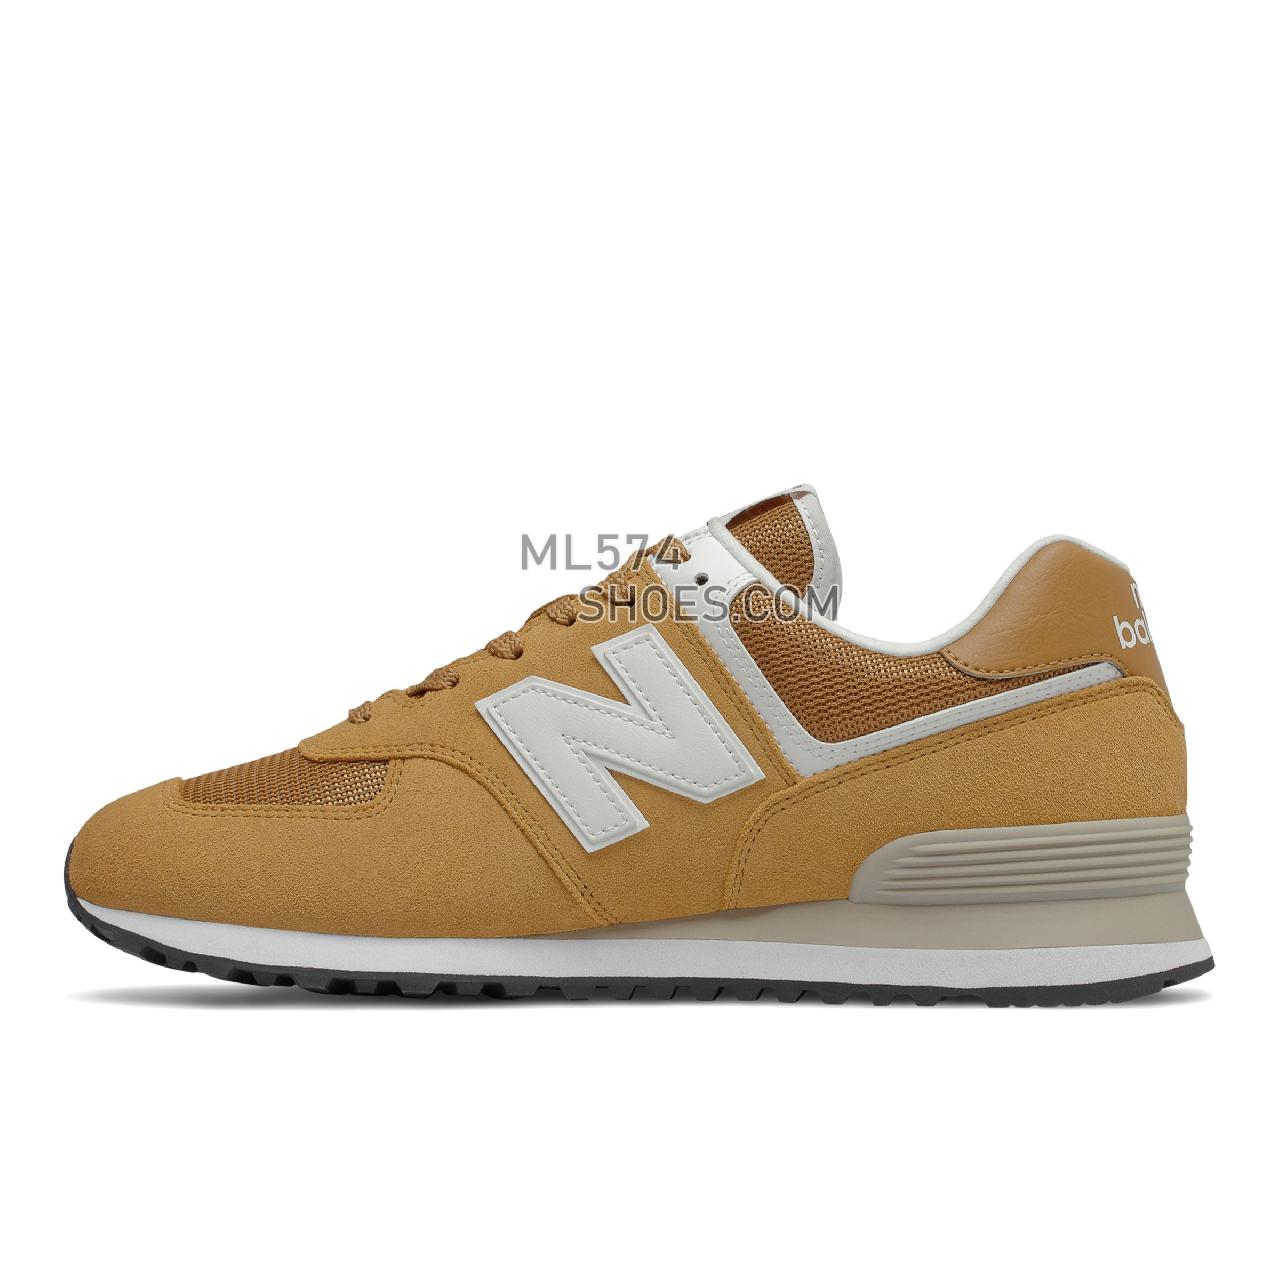 New Balance 574v2 - Men's Classic Sneakers - Workwear with White - ML574RP2